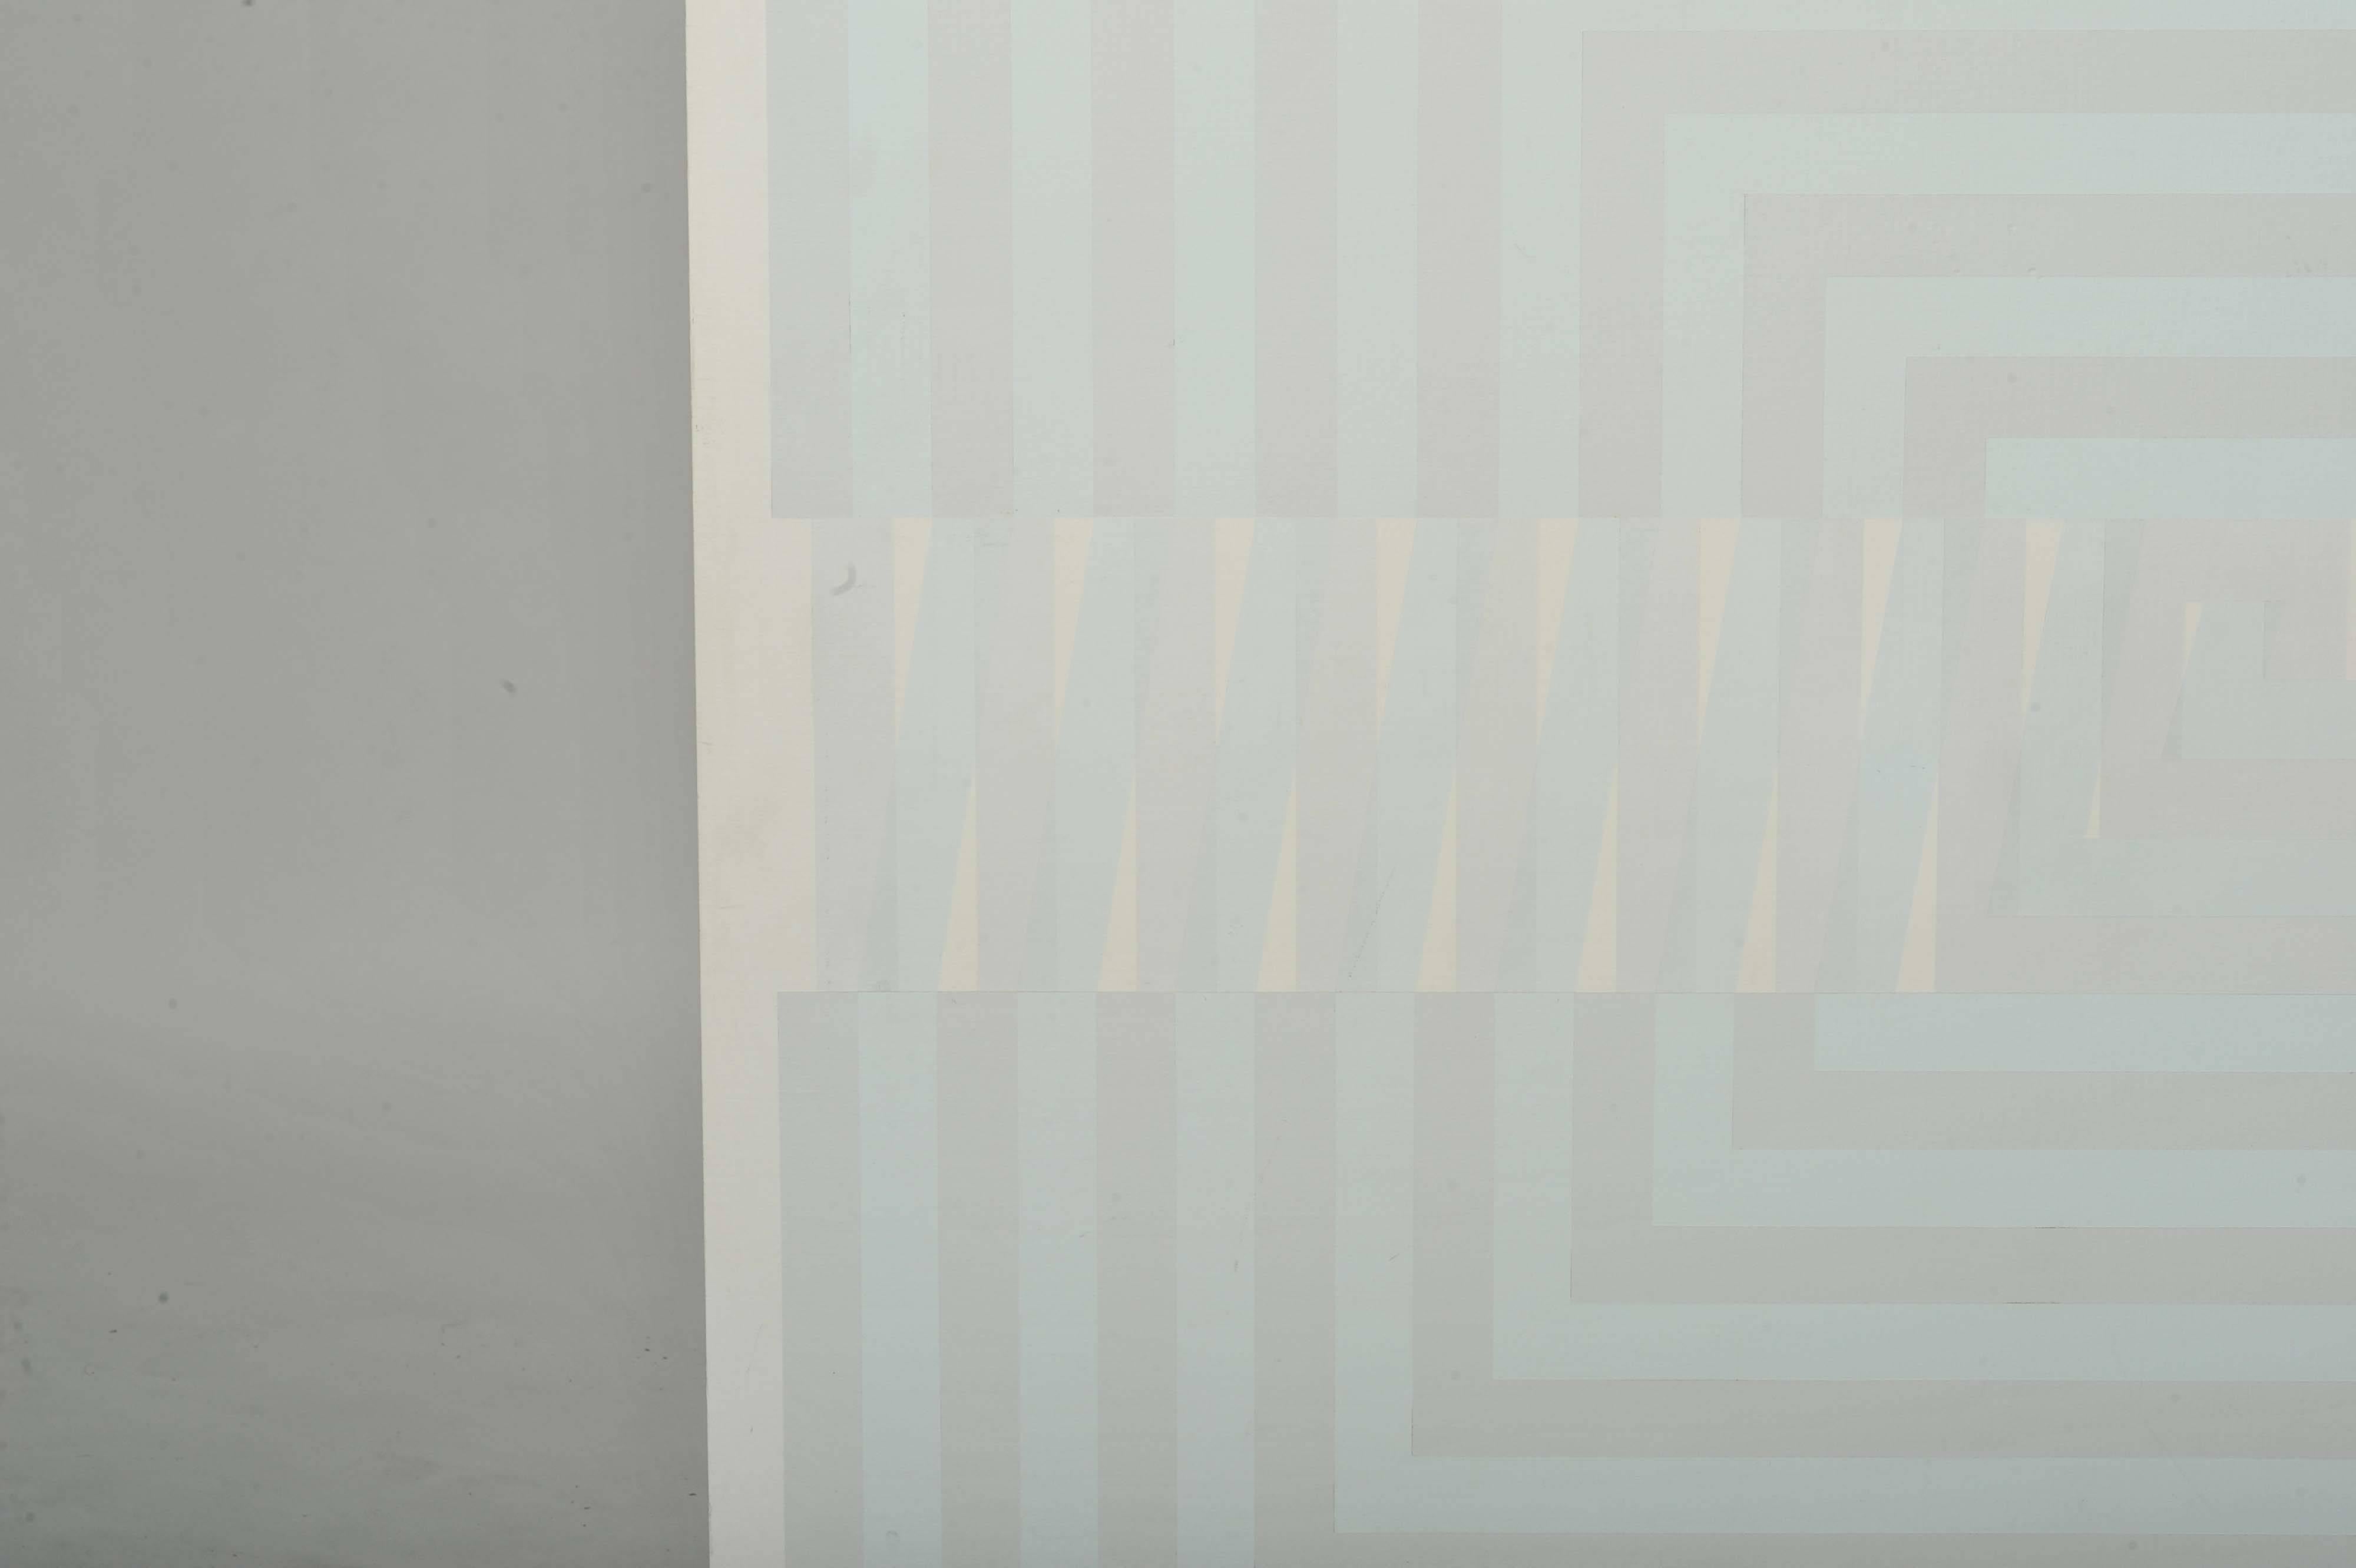 Subtle geometric labyrinth of lines and movement in pastel tones is by Majo Joostens and was in the Dutch National Art Collection. 
Acrylic paint on canvas mounted on board.